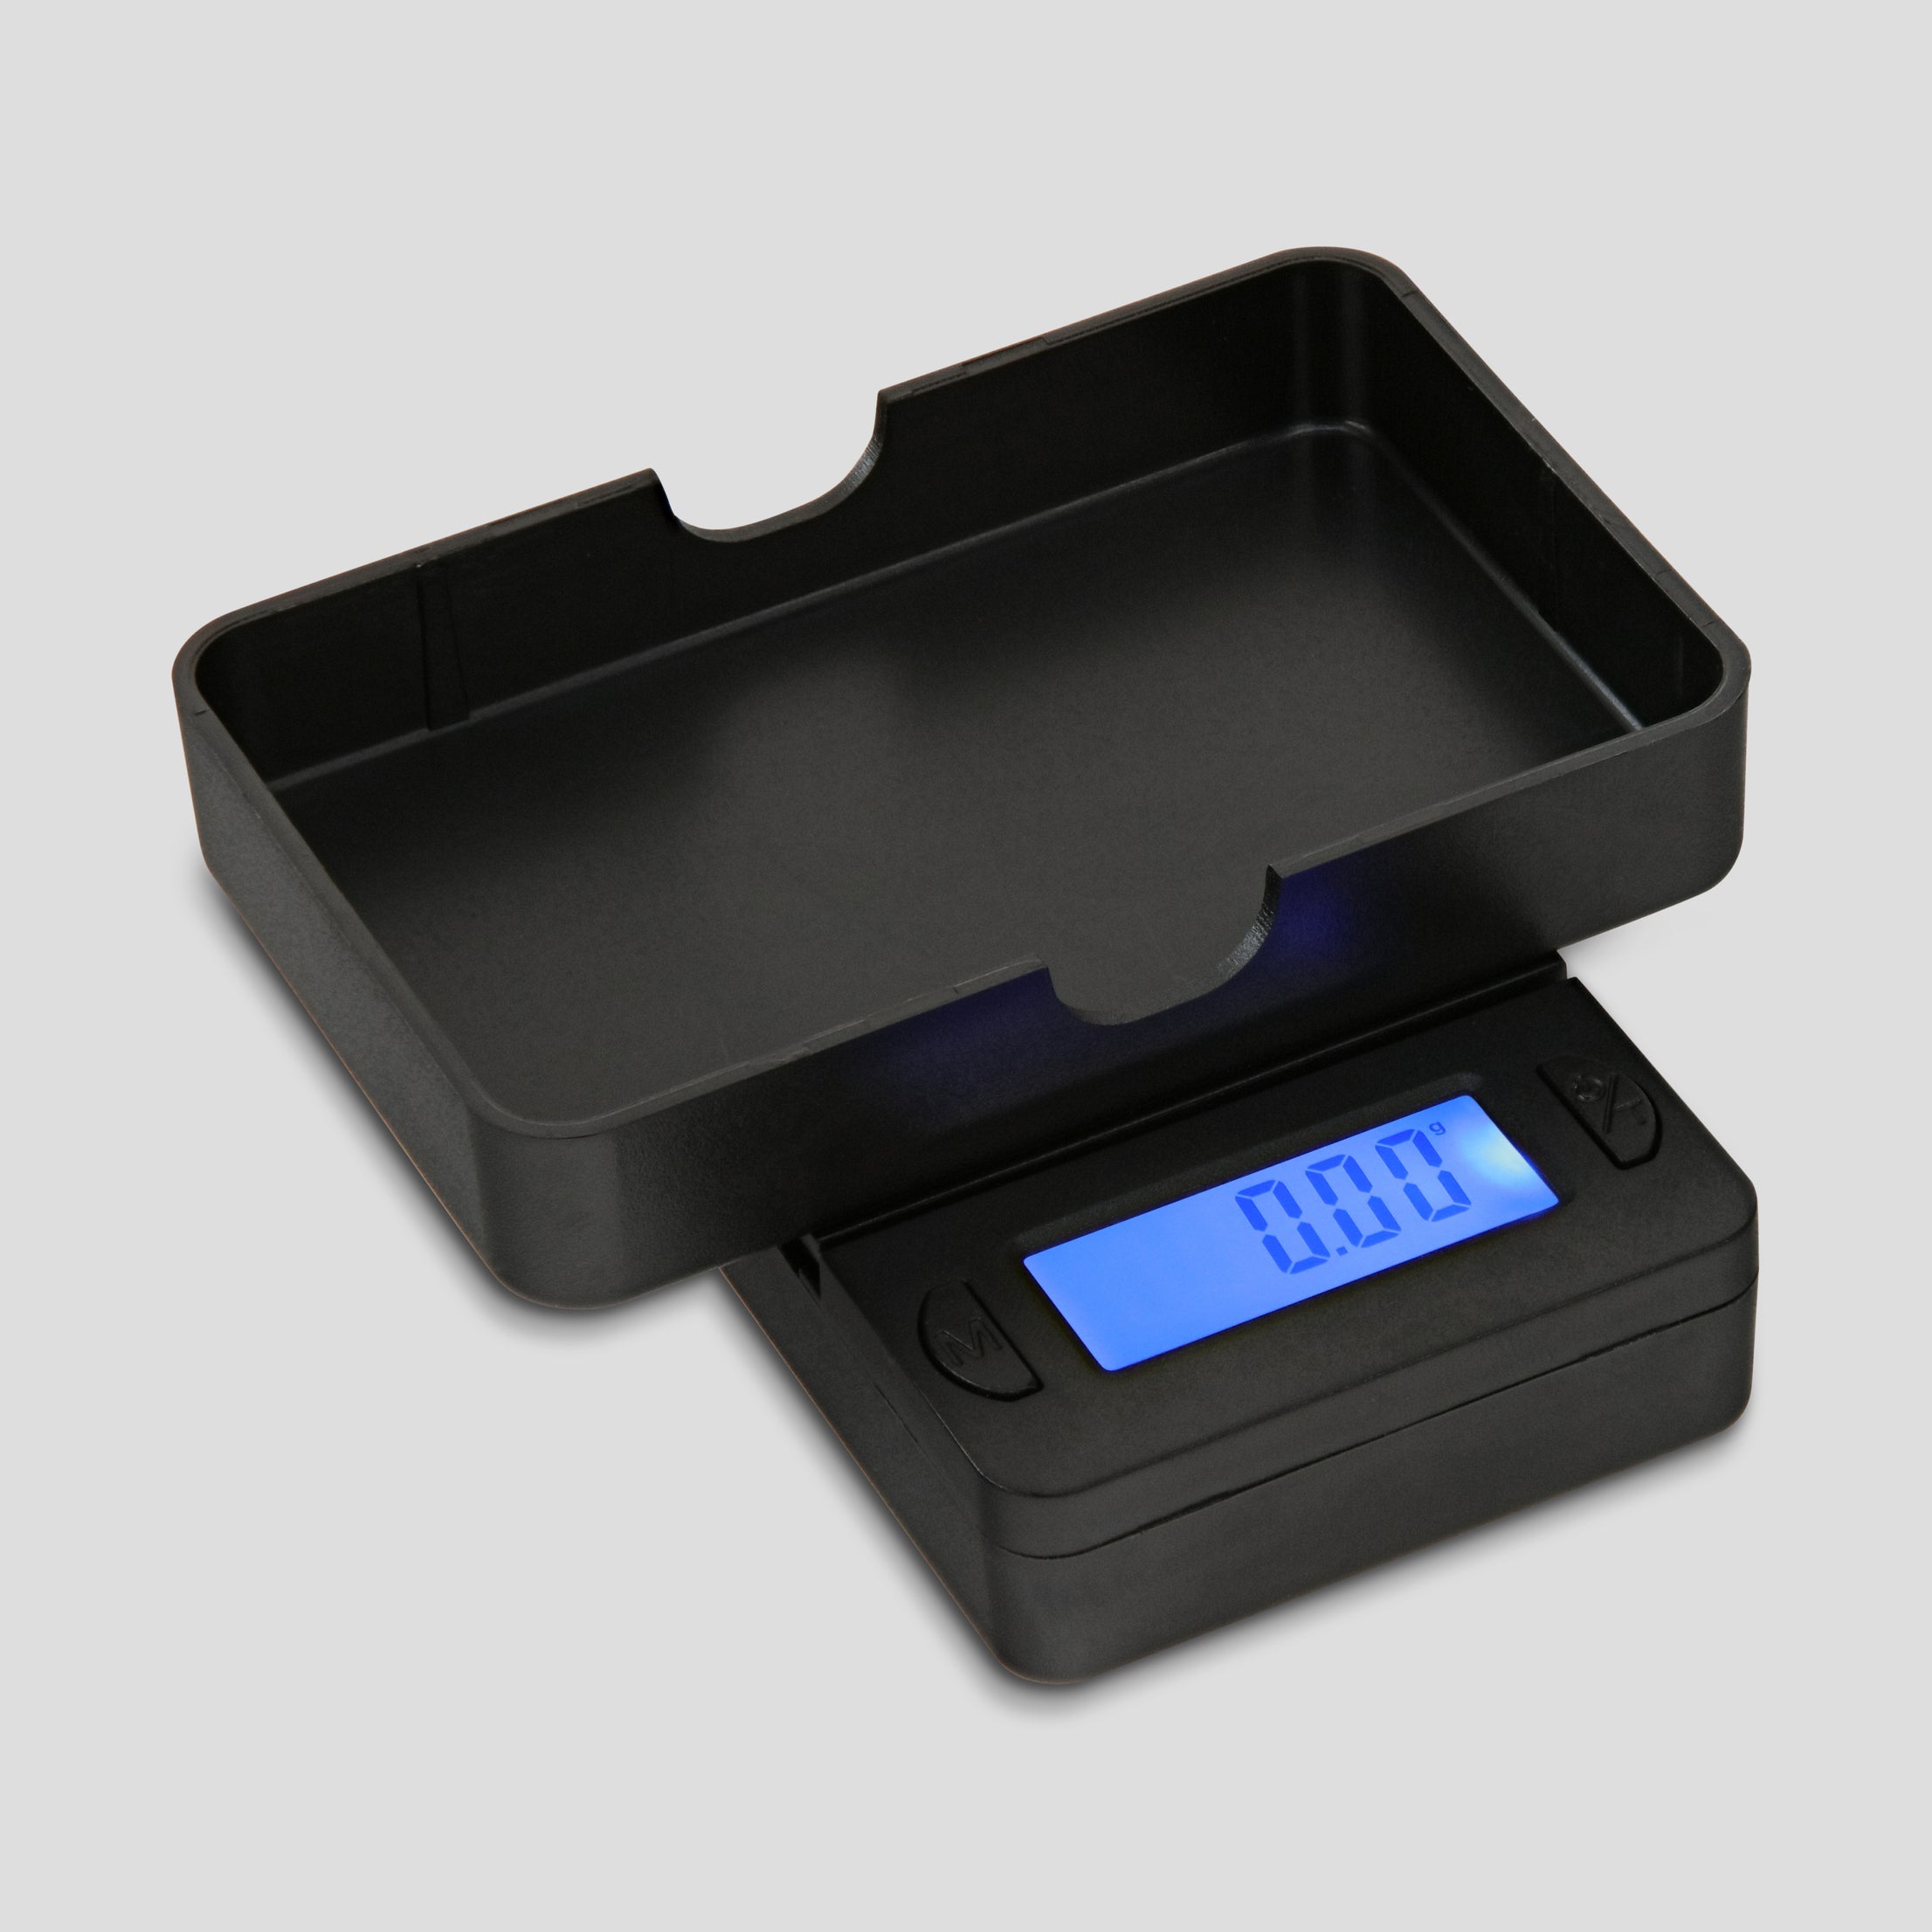 Clarity Digital Electronic Pocket Scale weighing scale – Kenex